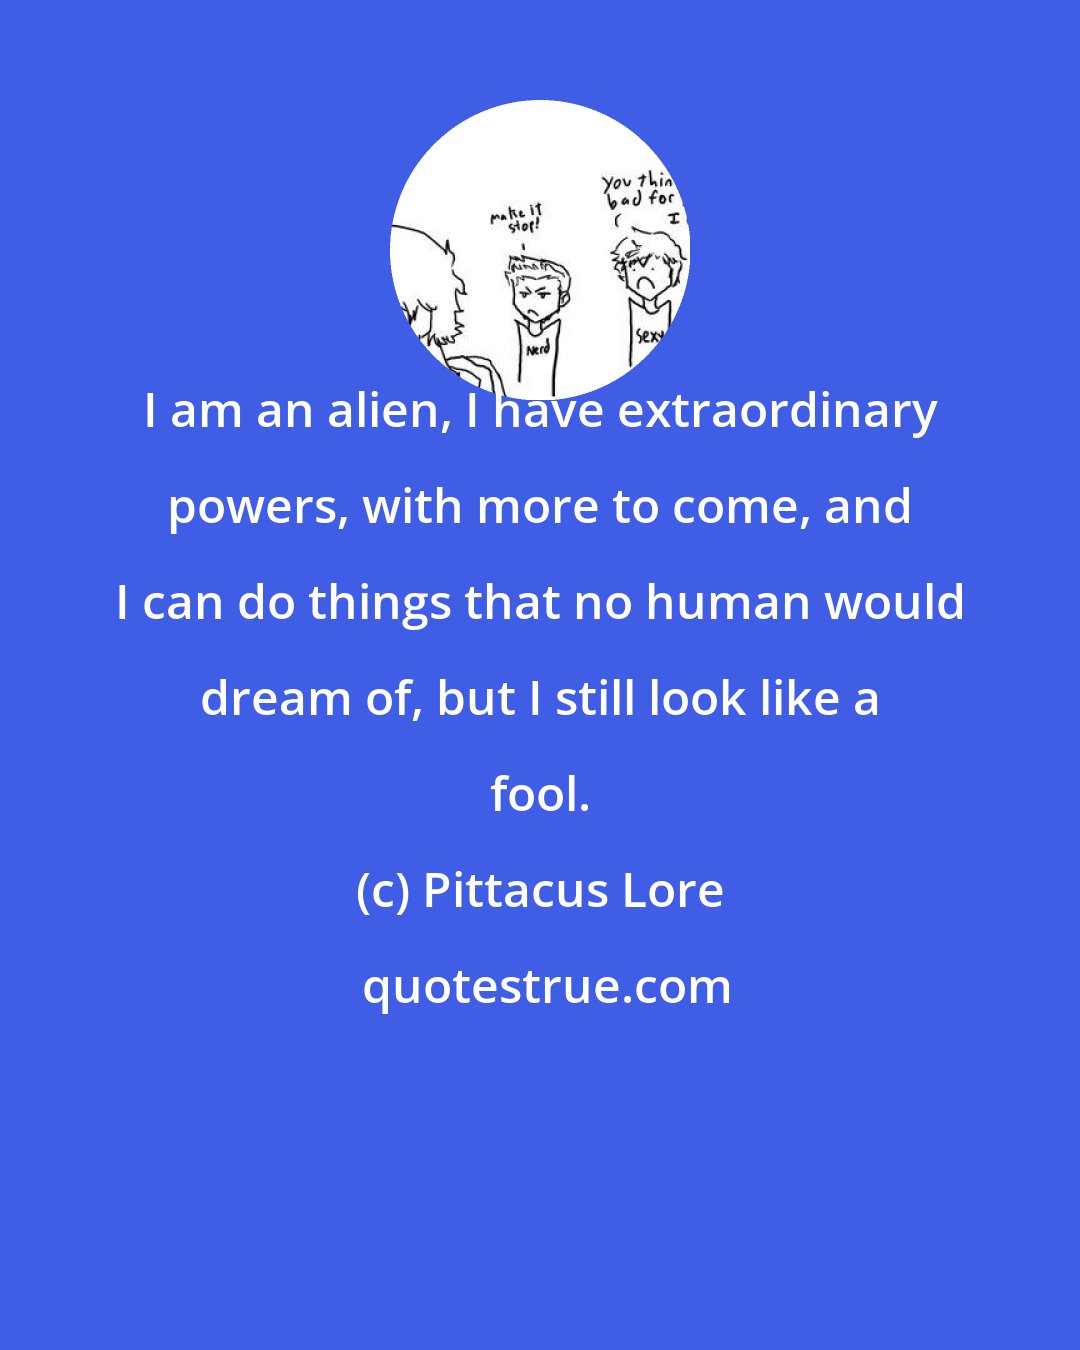 Pittacus Lore: I am an alien, I have extraordinary powers, with more to come, and I can do things that no human would dream of, but I still look like a fool.